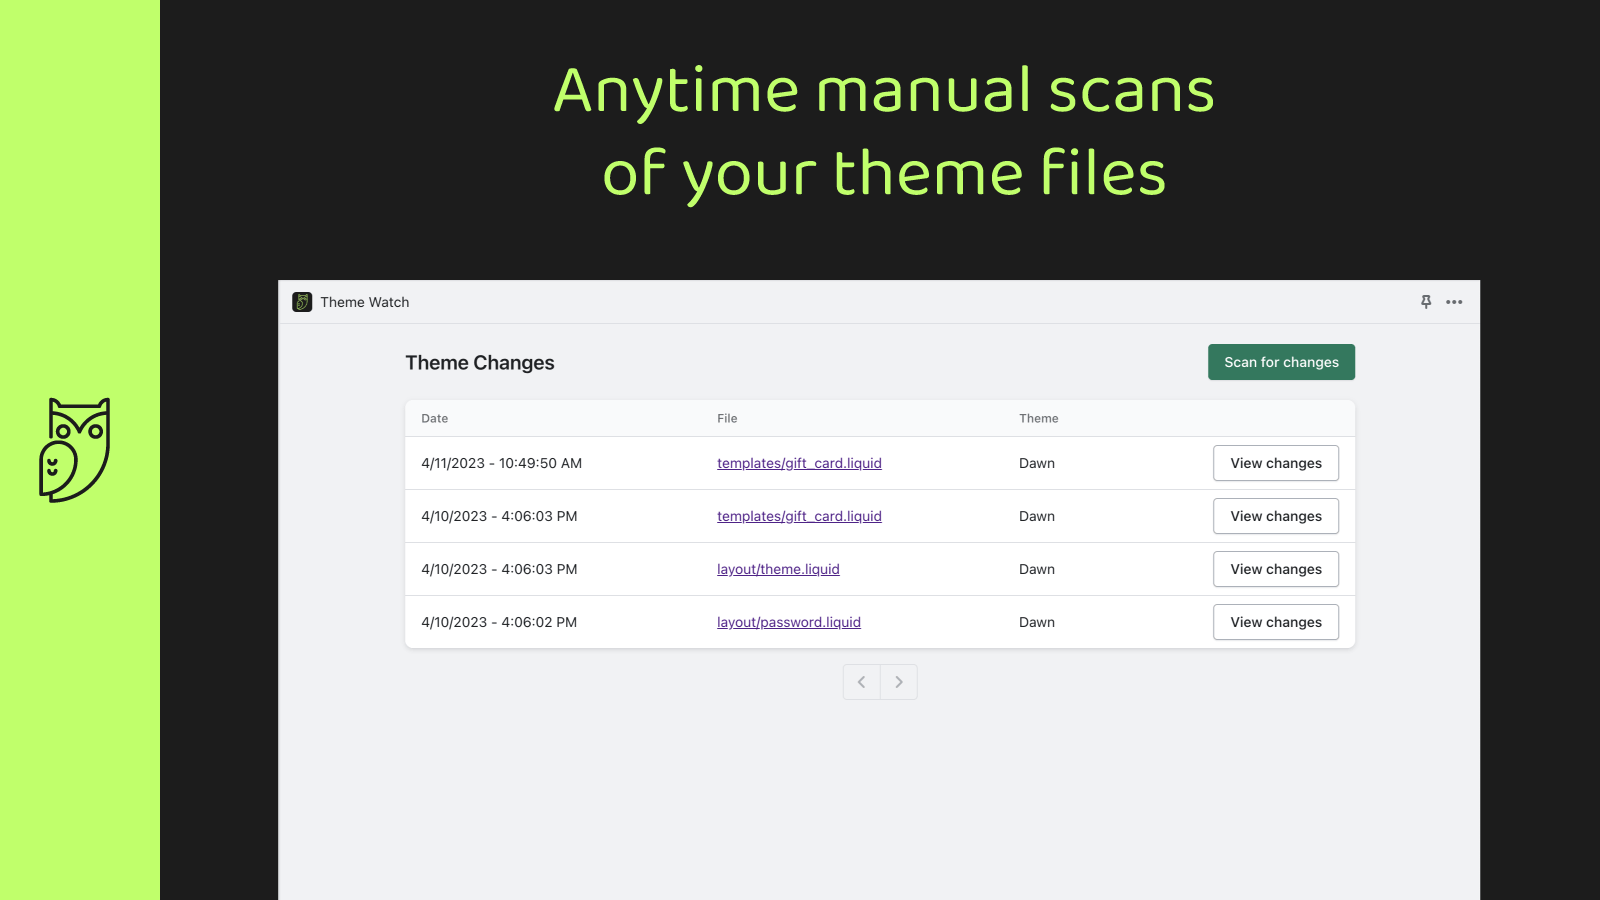 Anytime manual scans of your theme files.